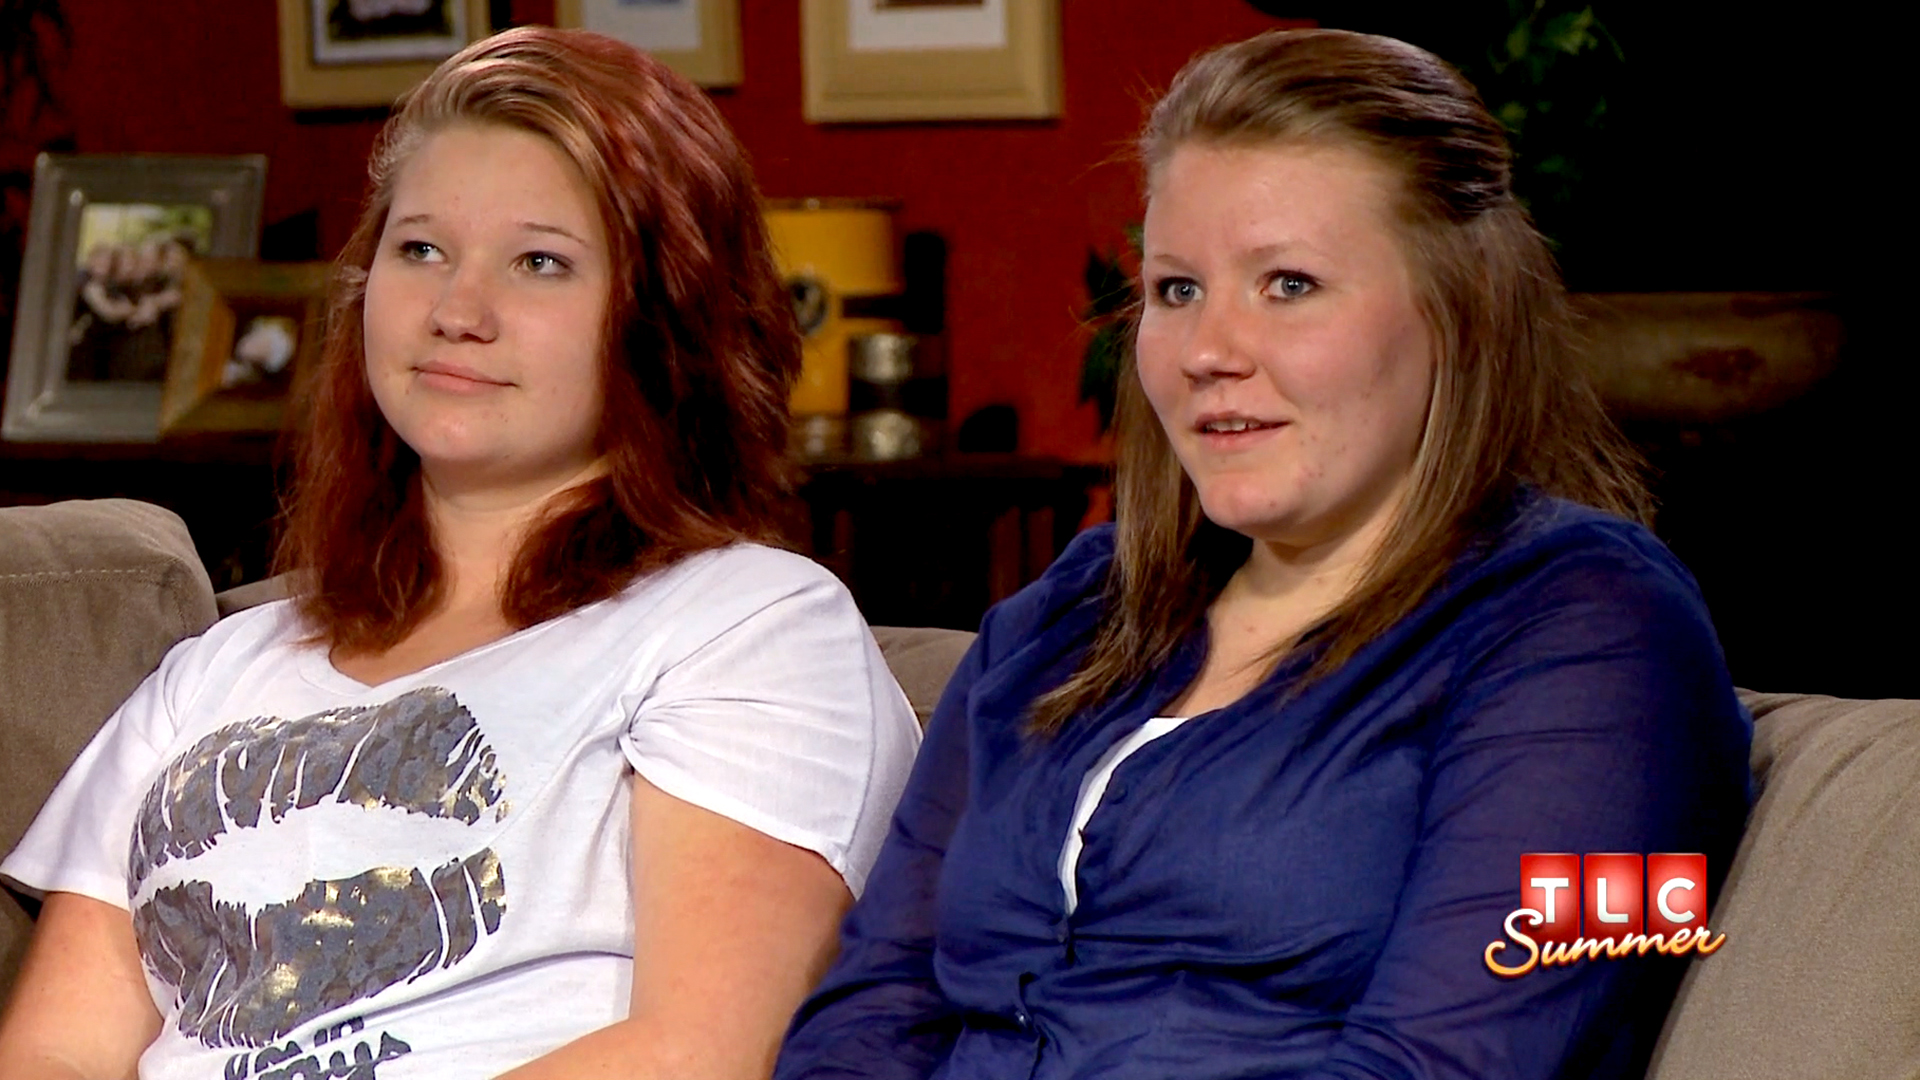 Sister Wives' daughter looks forward to her own plural marriage